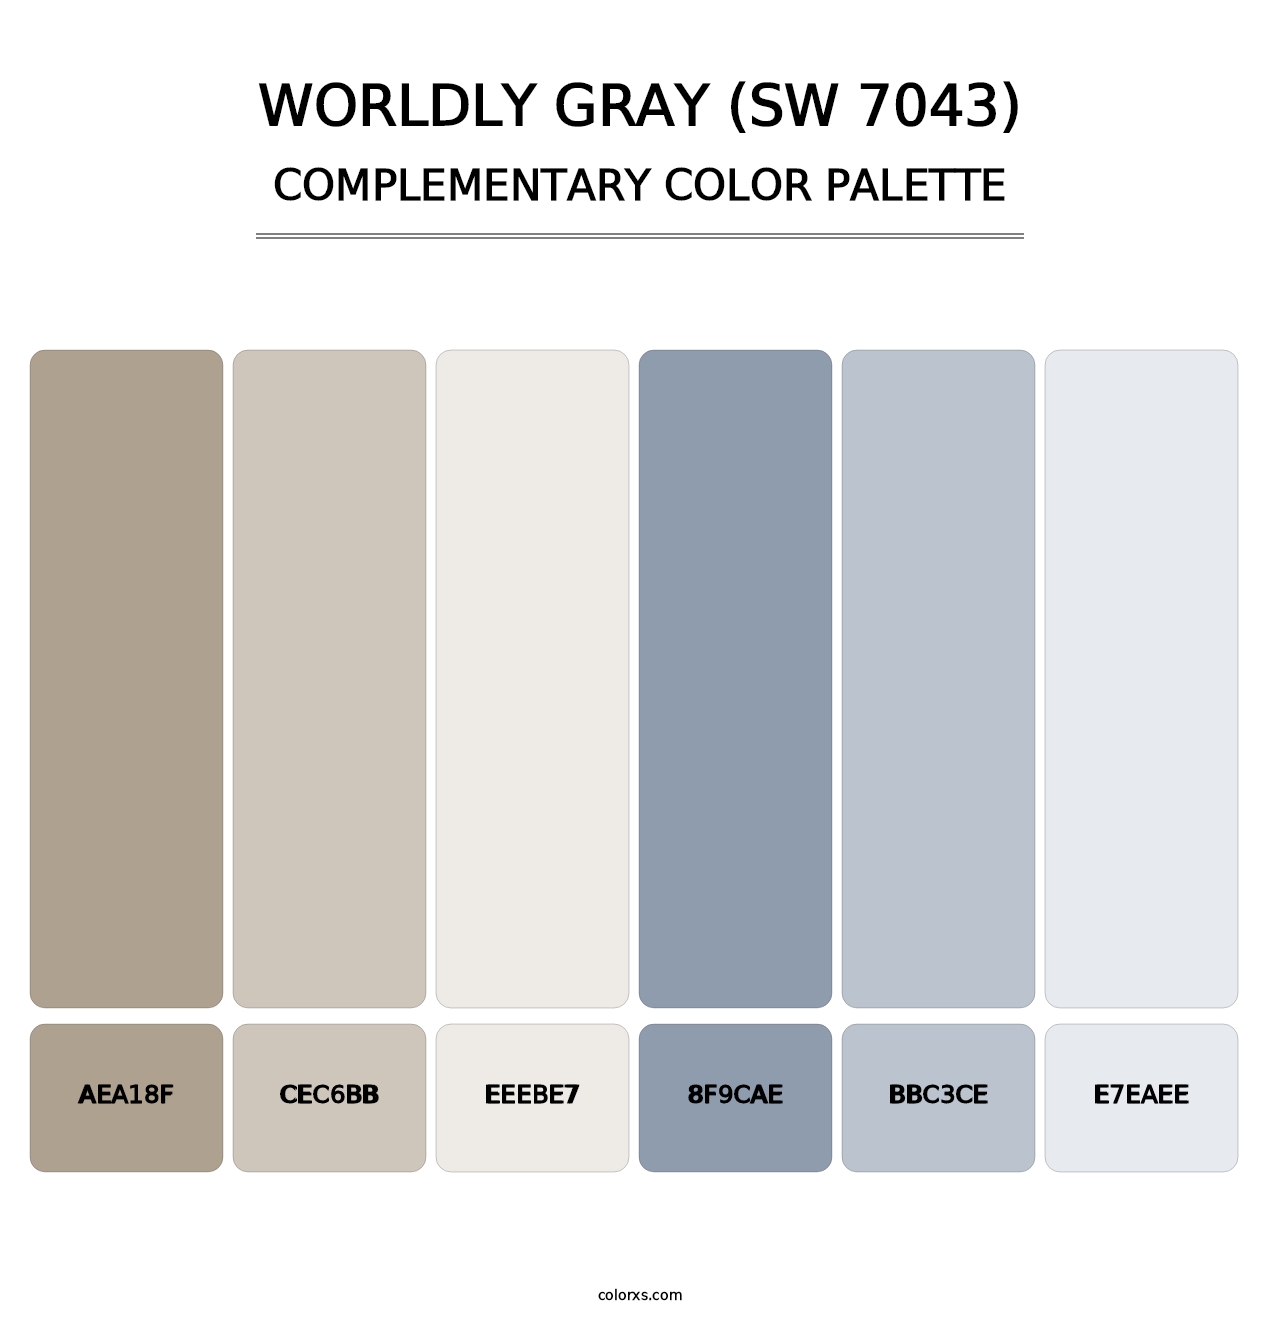 Worldly Gray (SW 7043) - Complementary Color Palette